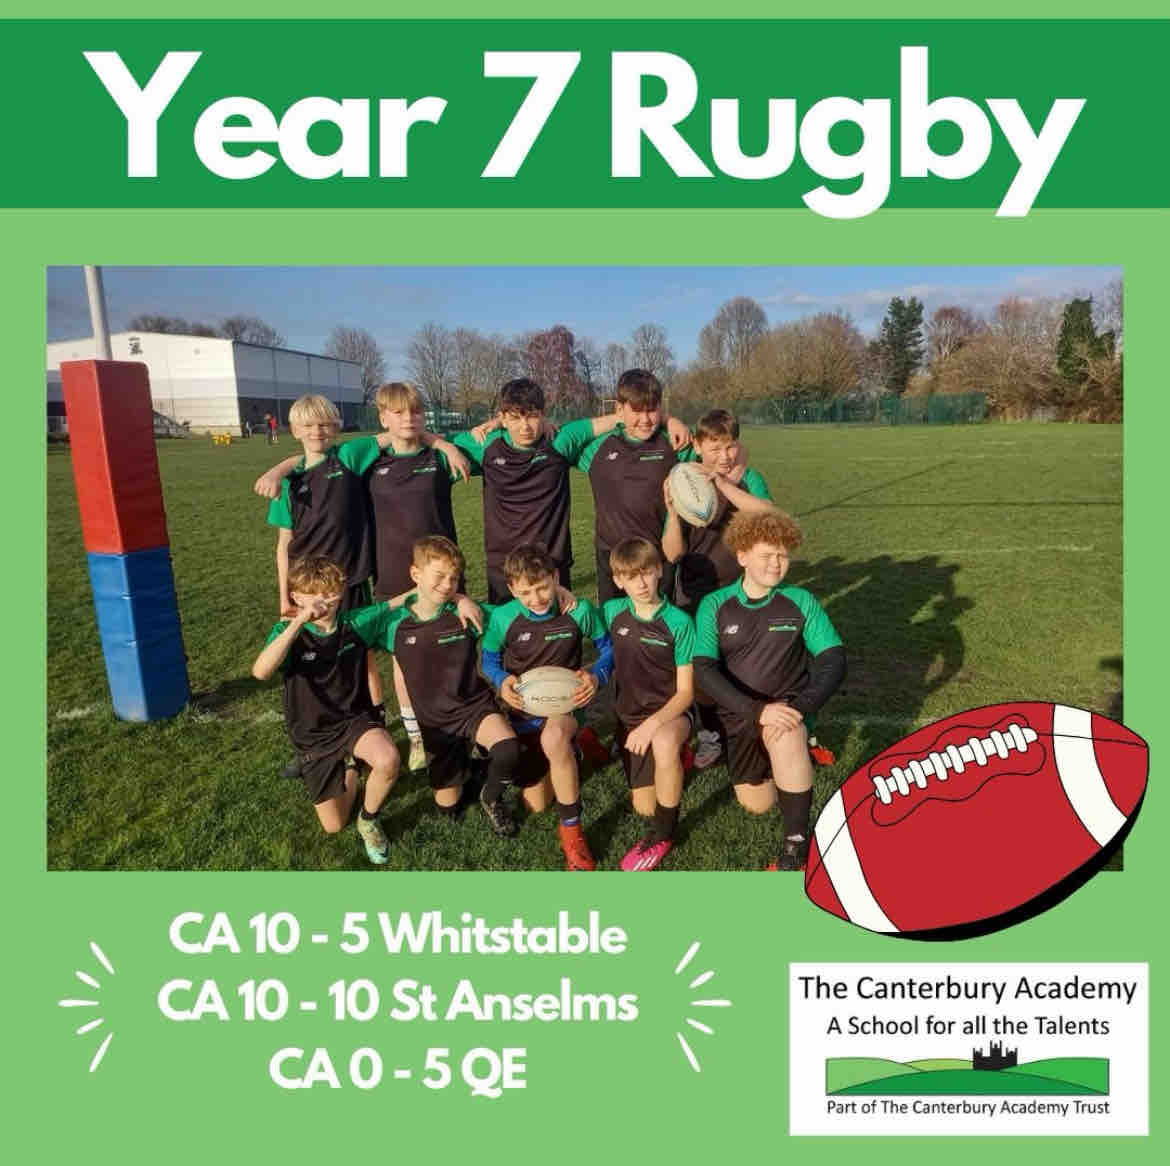 Our Year 7 Rugby team have done really well recently, and we are very proud ! A big thank you to QE for hosting the Rugby Festival 🏉 #CATsport